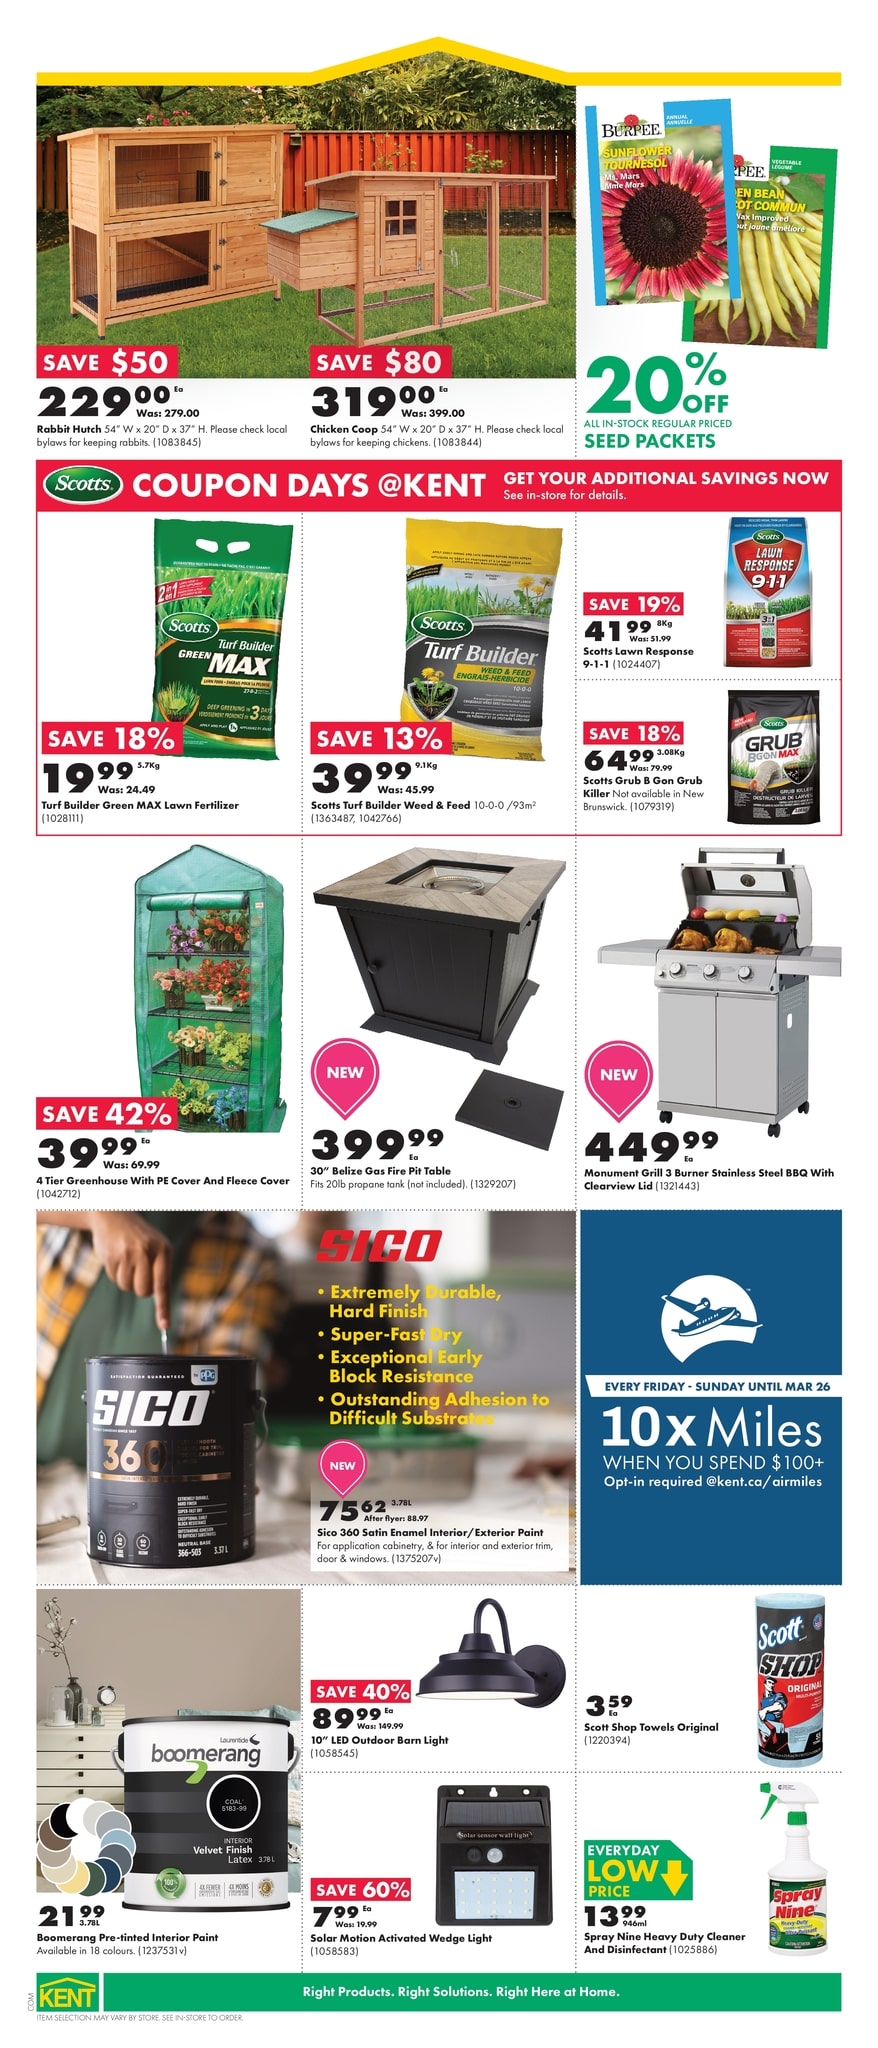 Kent - Weekly Flyer Specials - Page 4